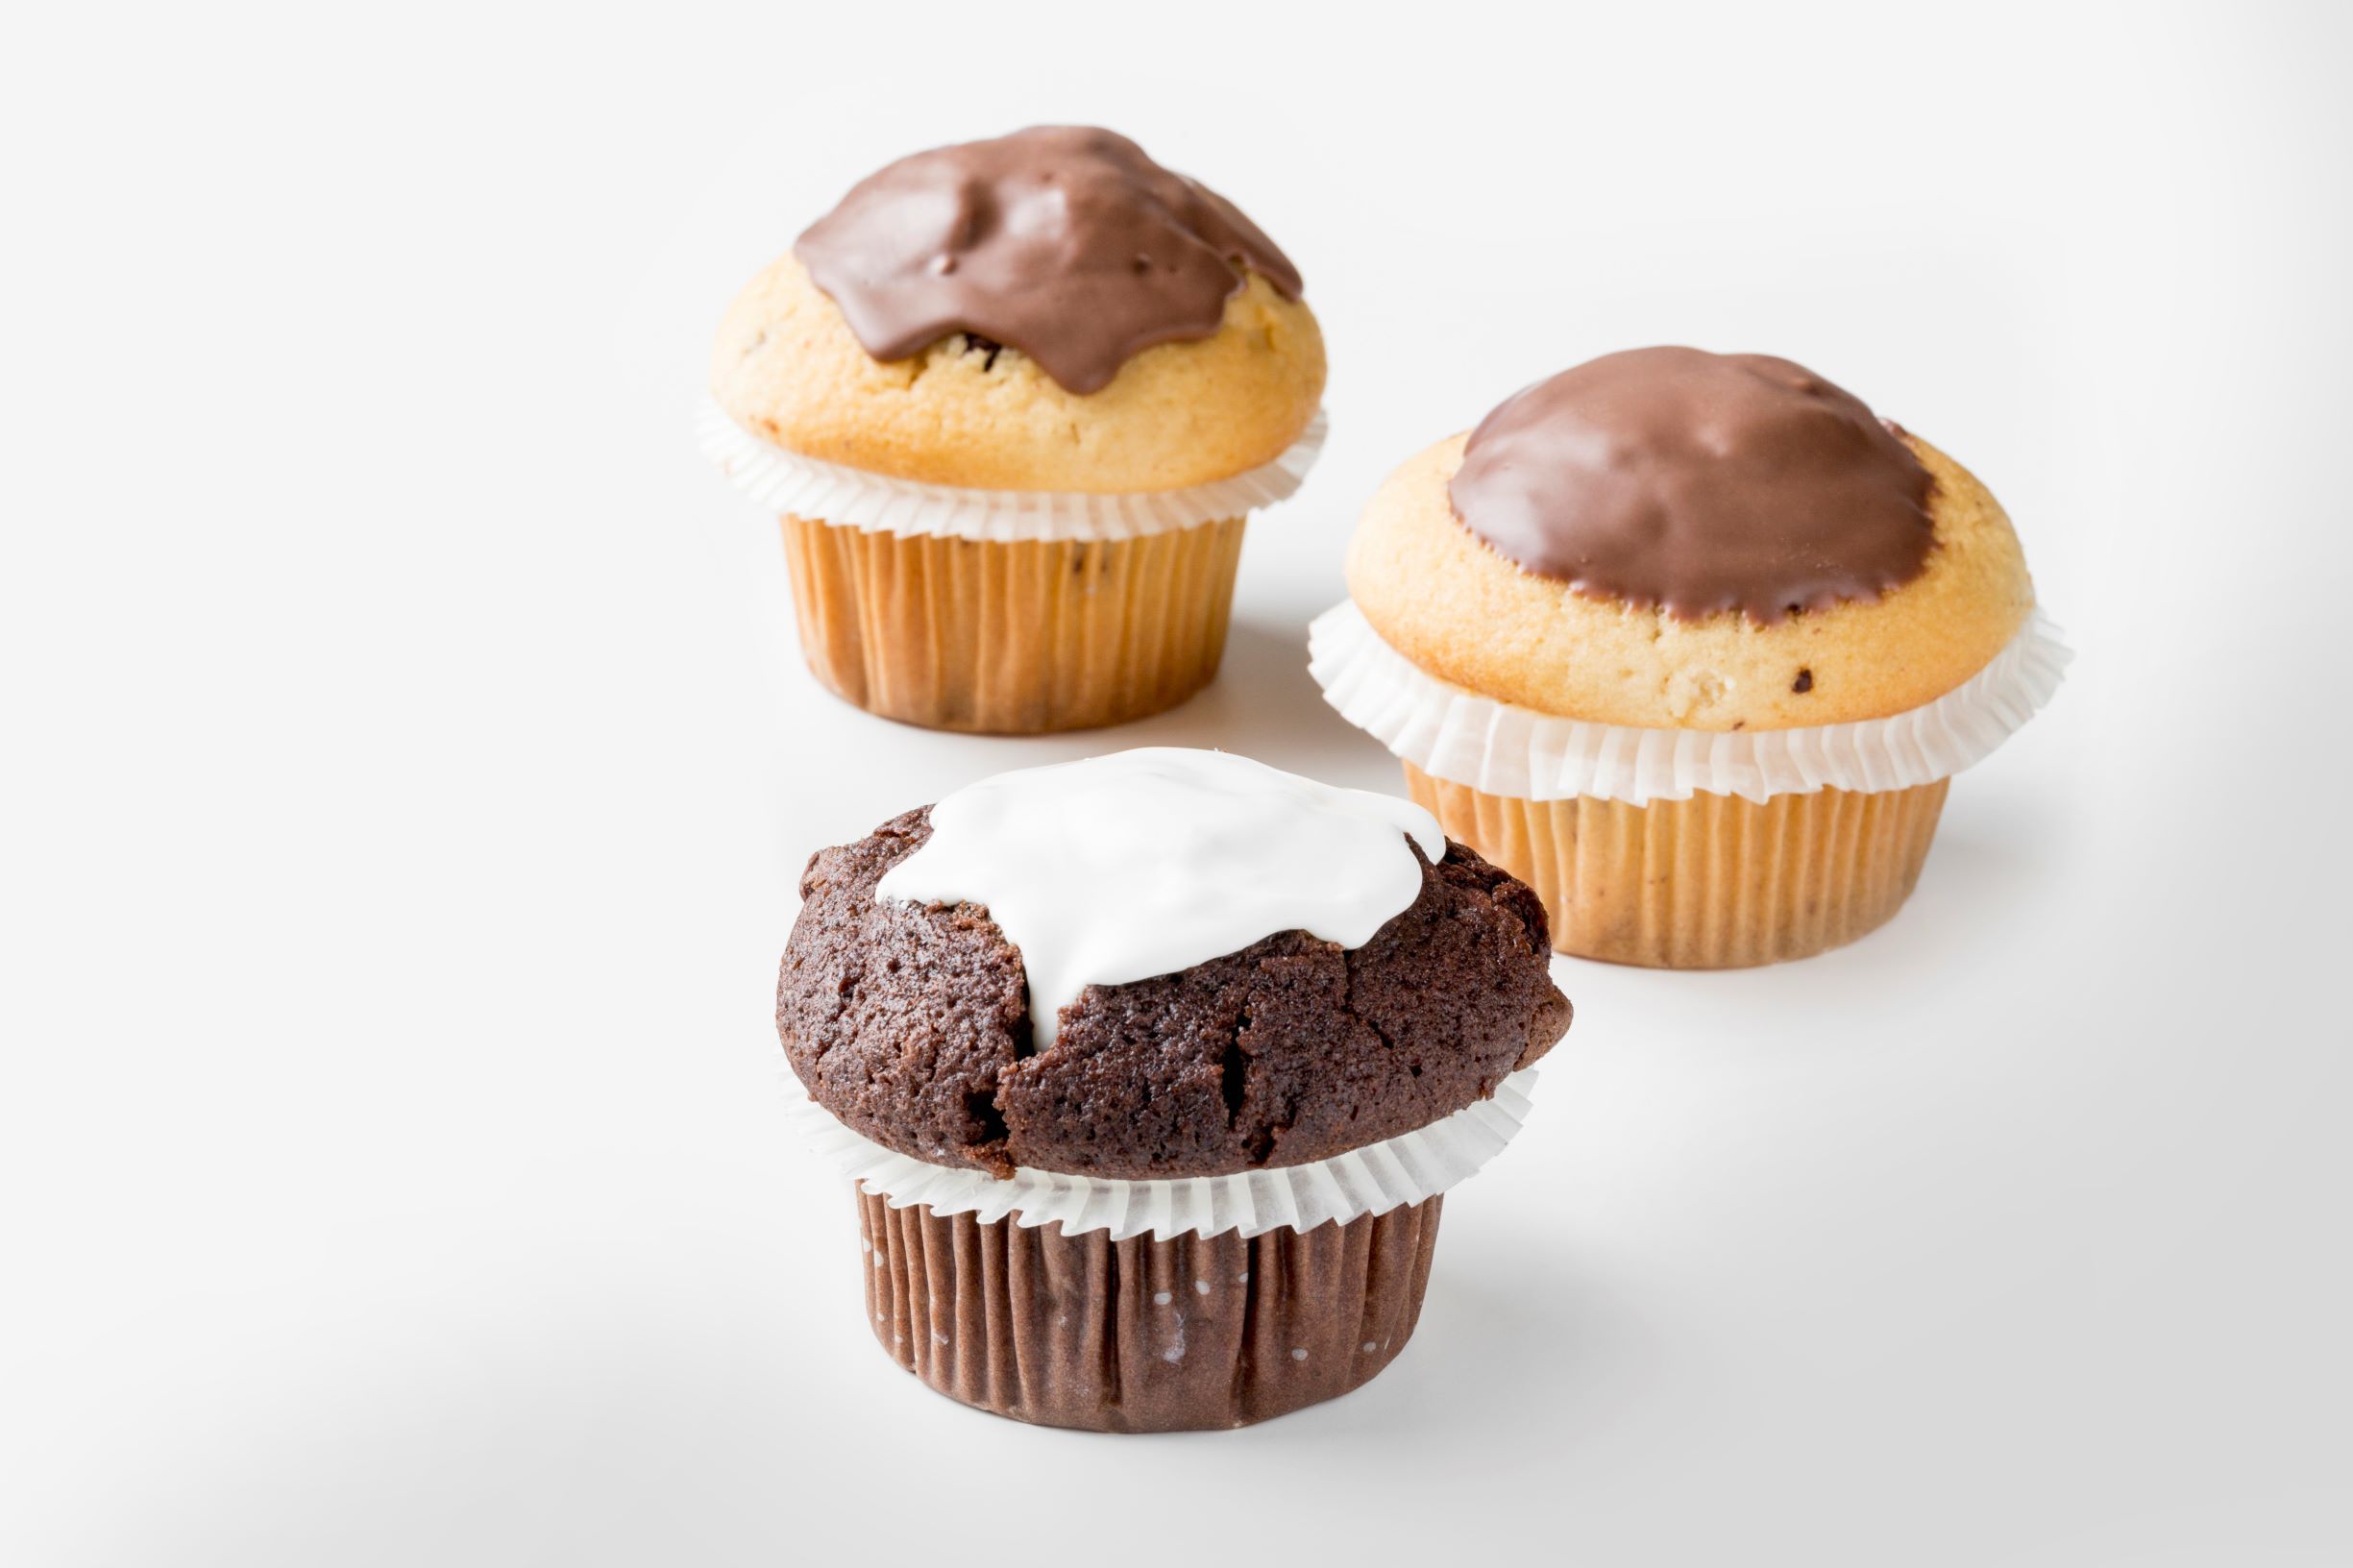 Three muffins covered with white and milk chocolate by FoodJet chocolate depositor